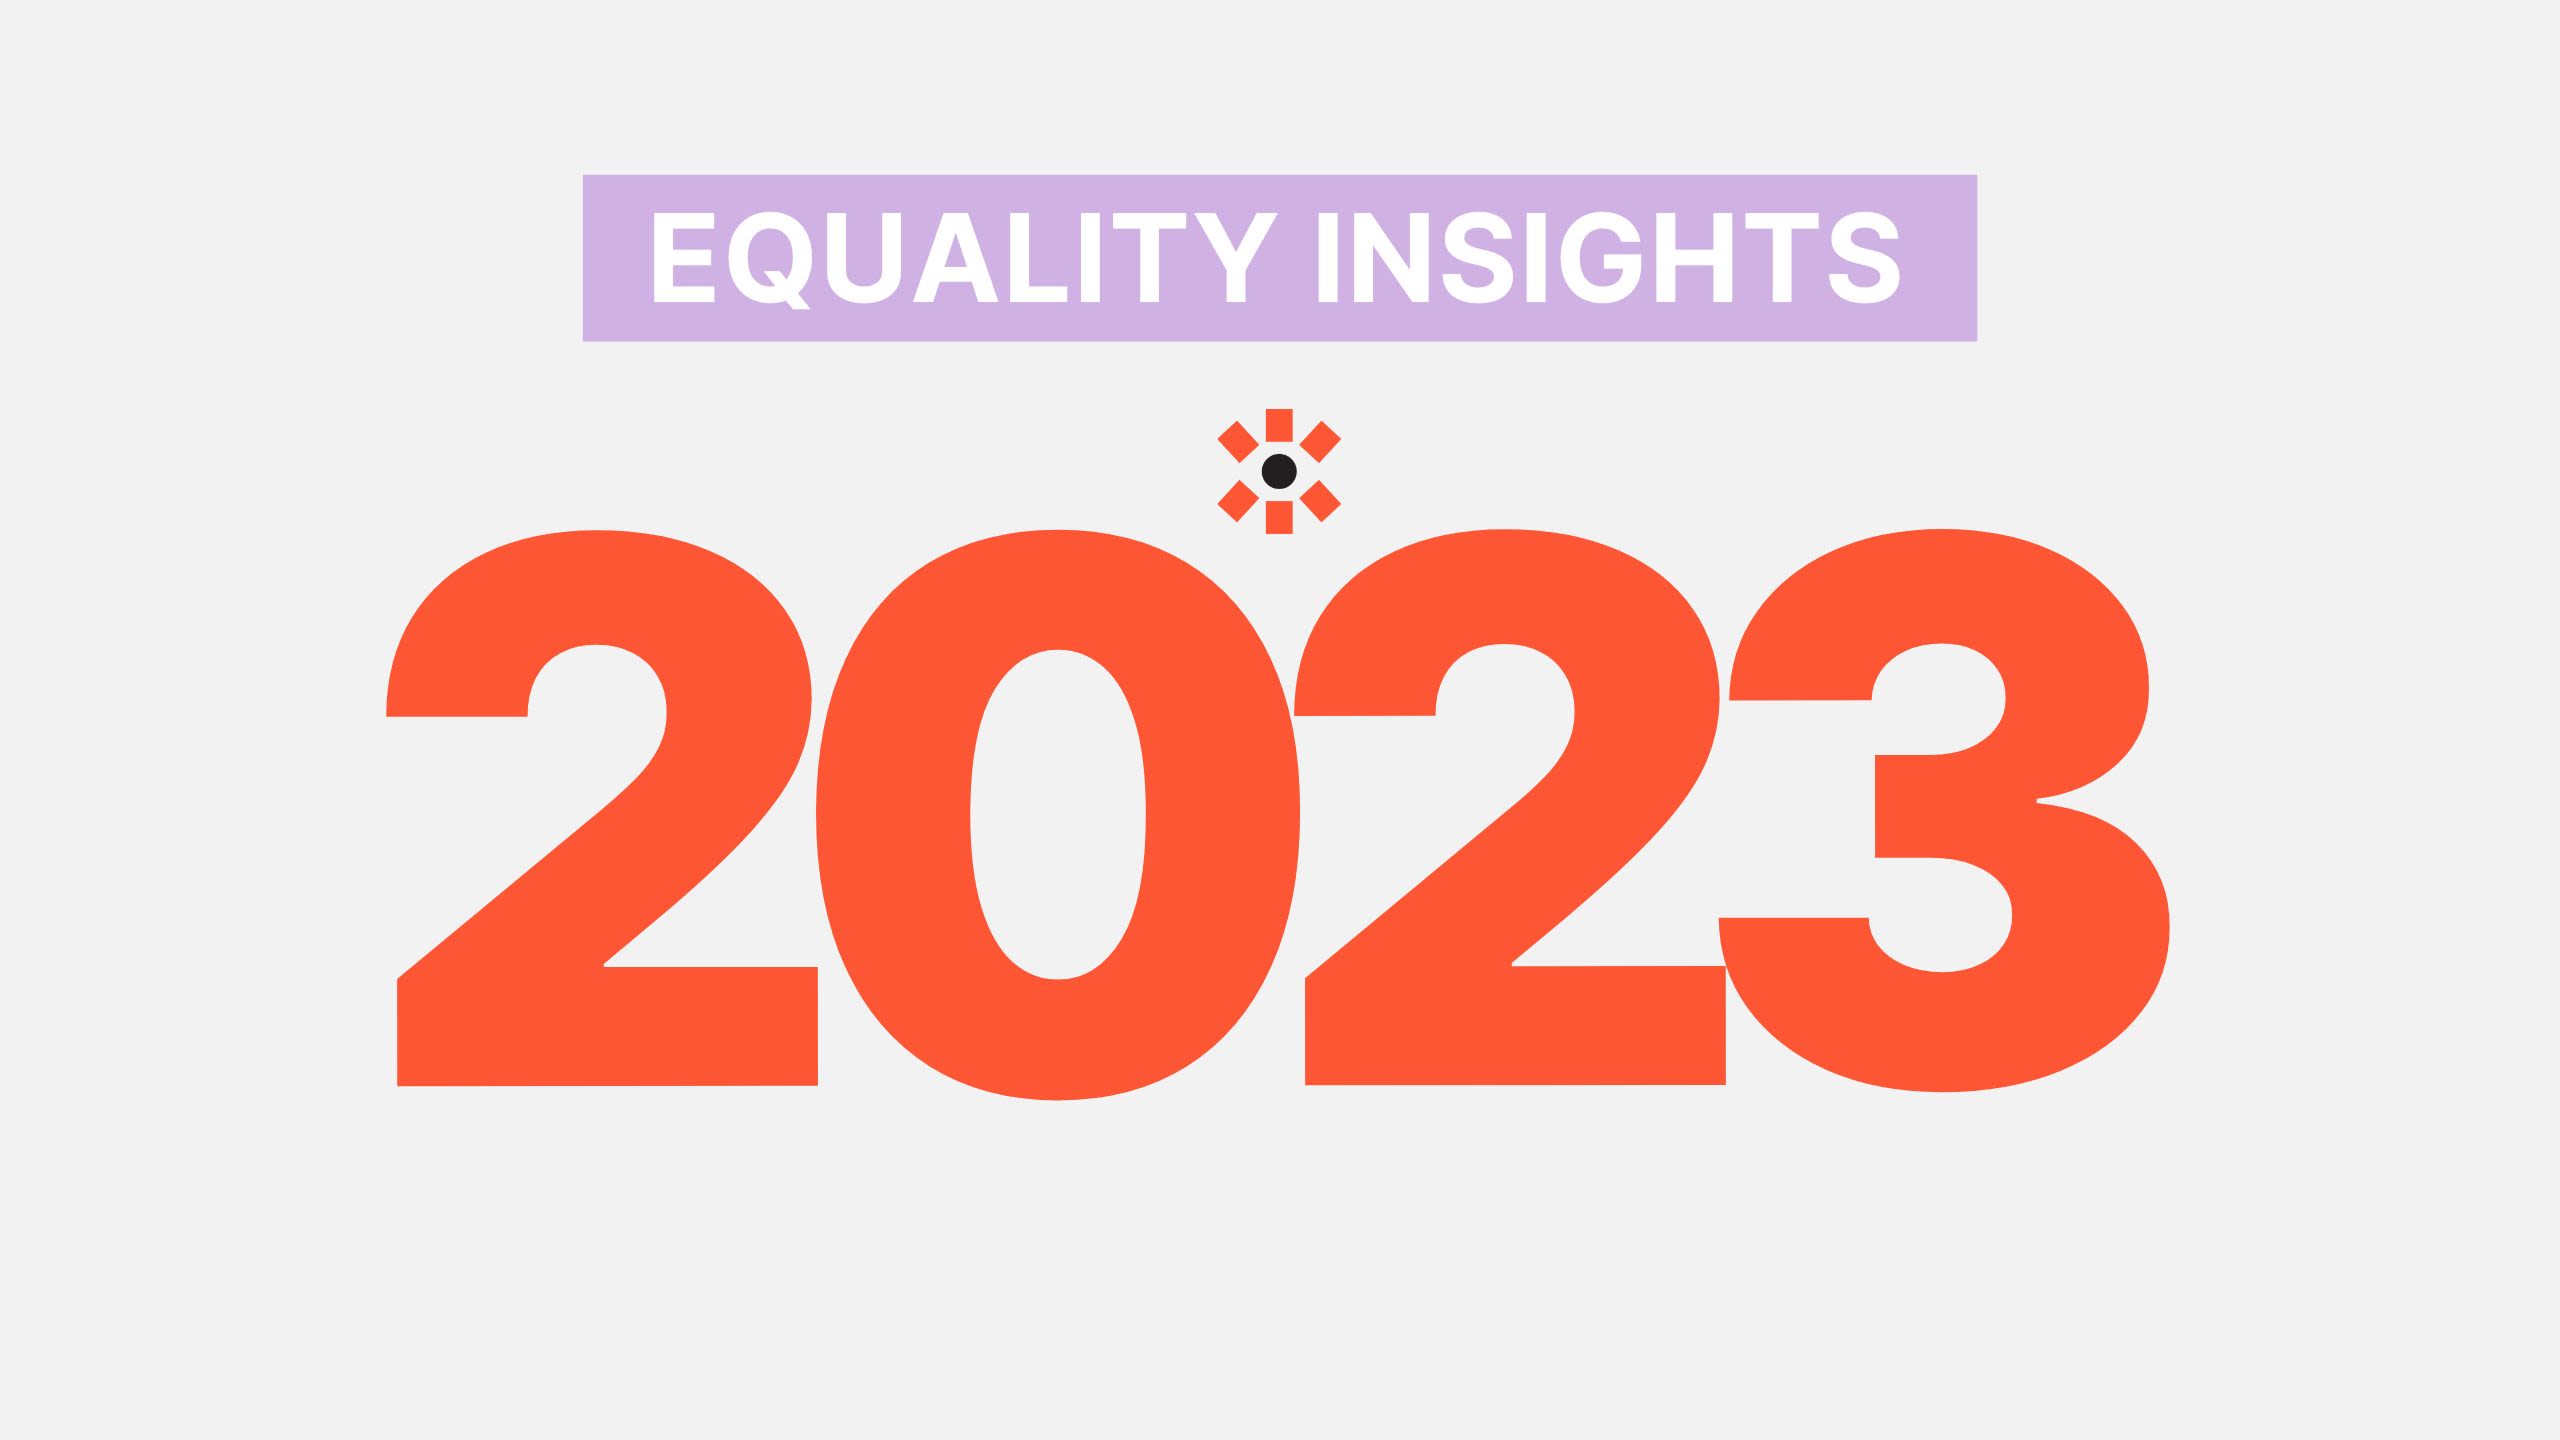 Equality Insights 2023 is written in big letters. The Equality Insights eye logo is in the centre.